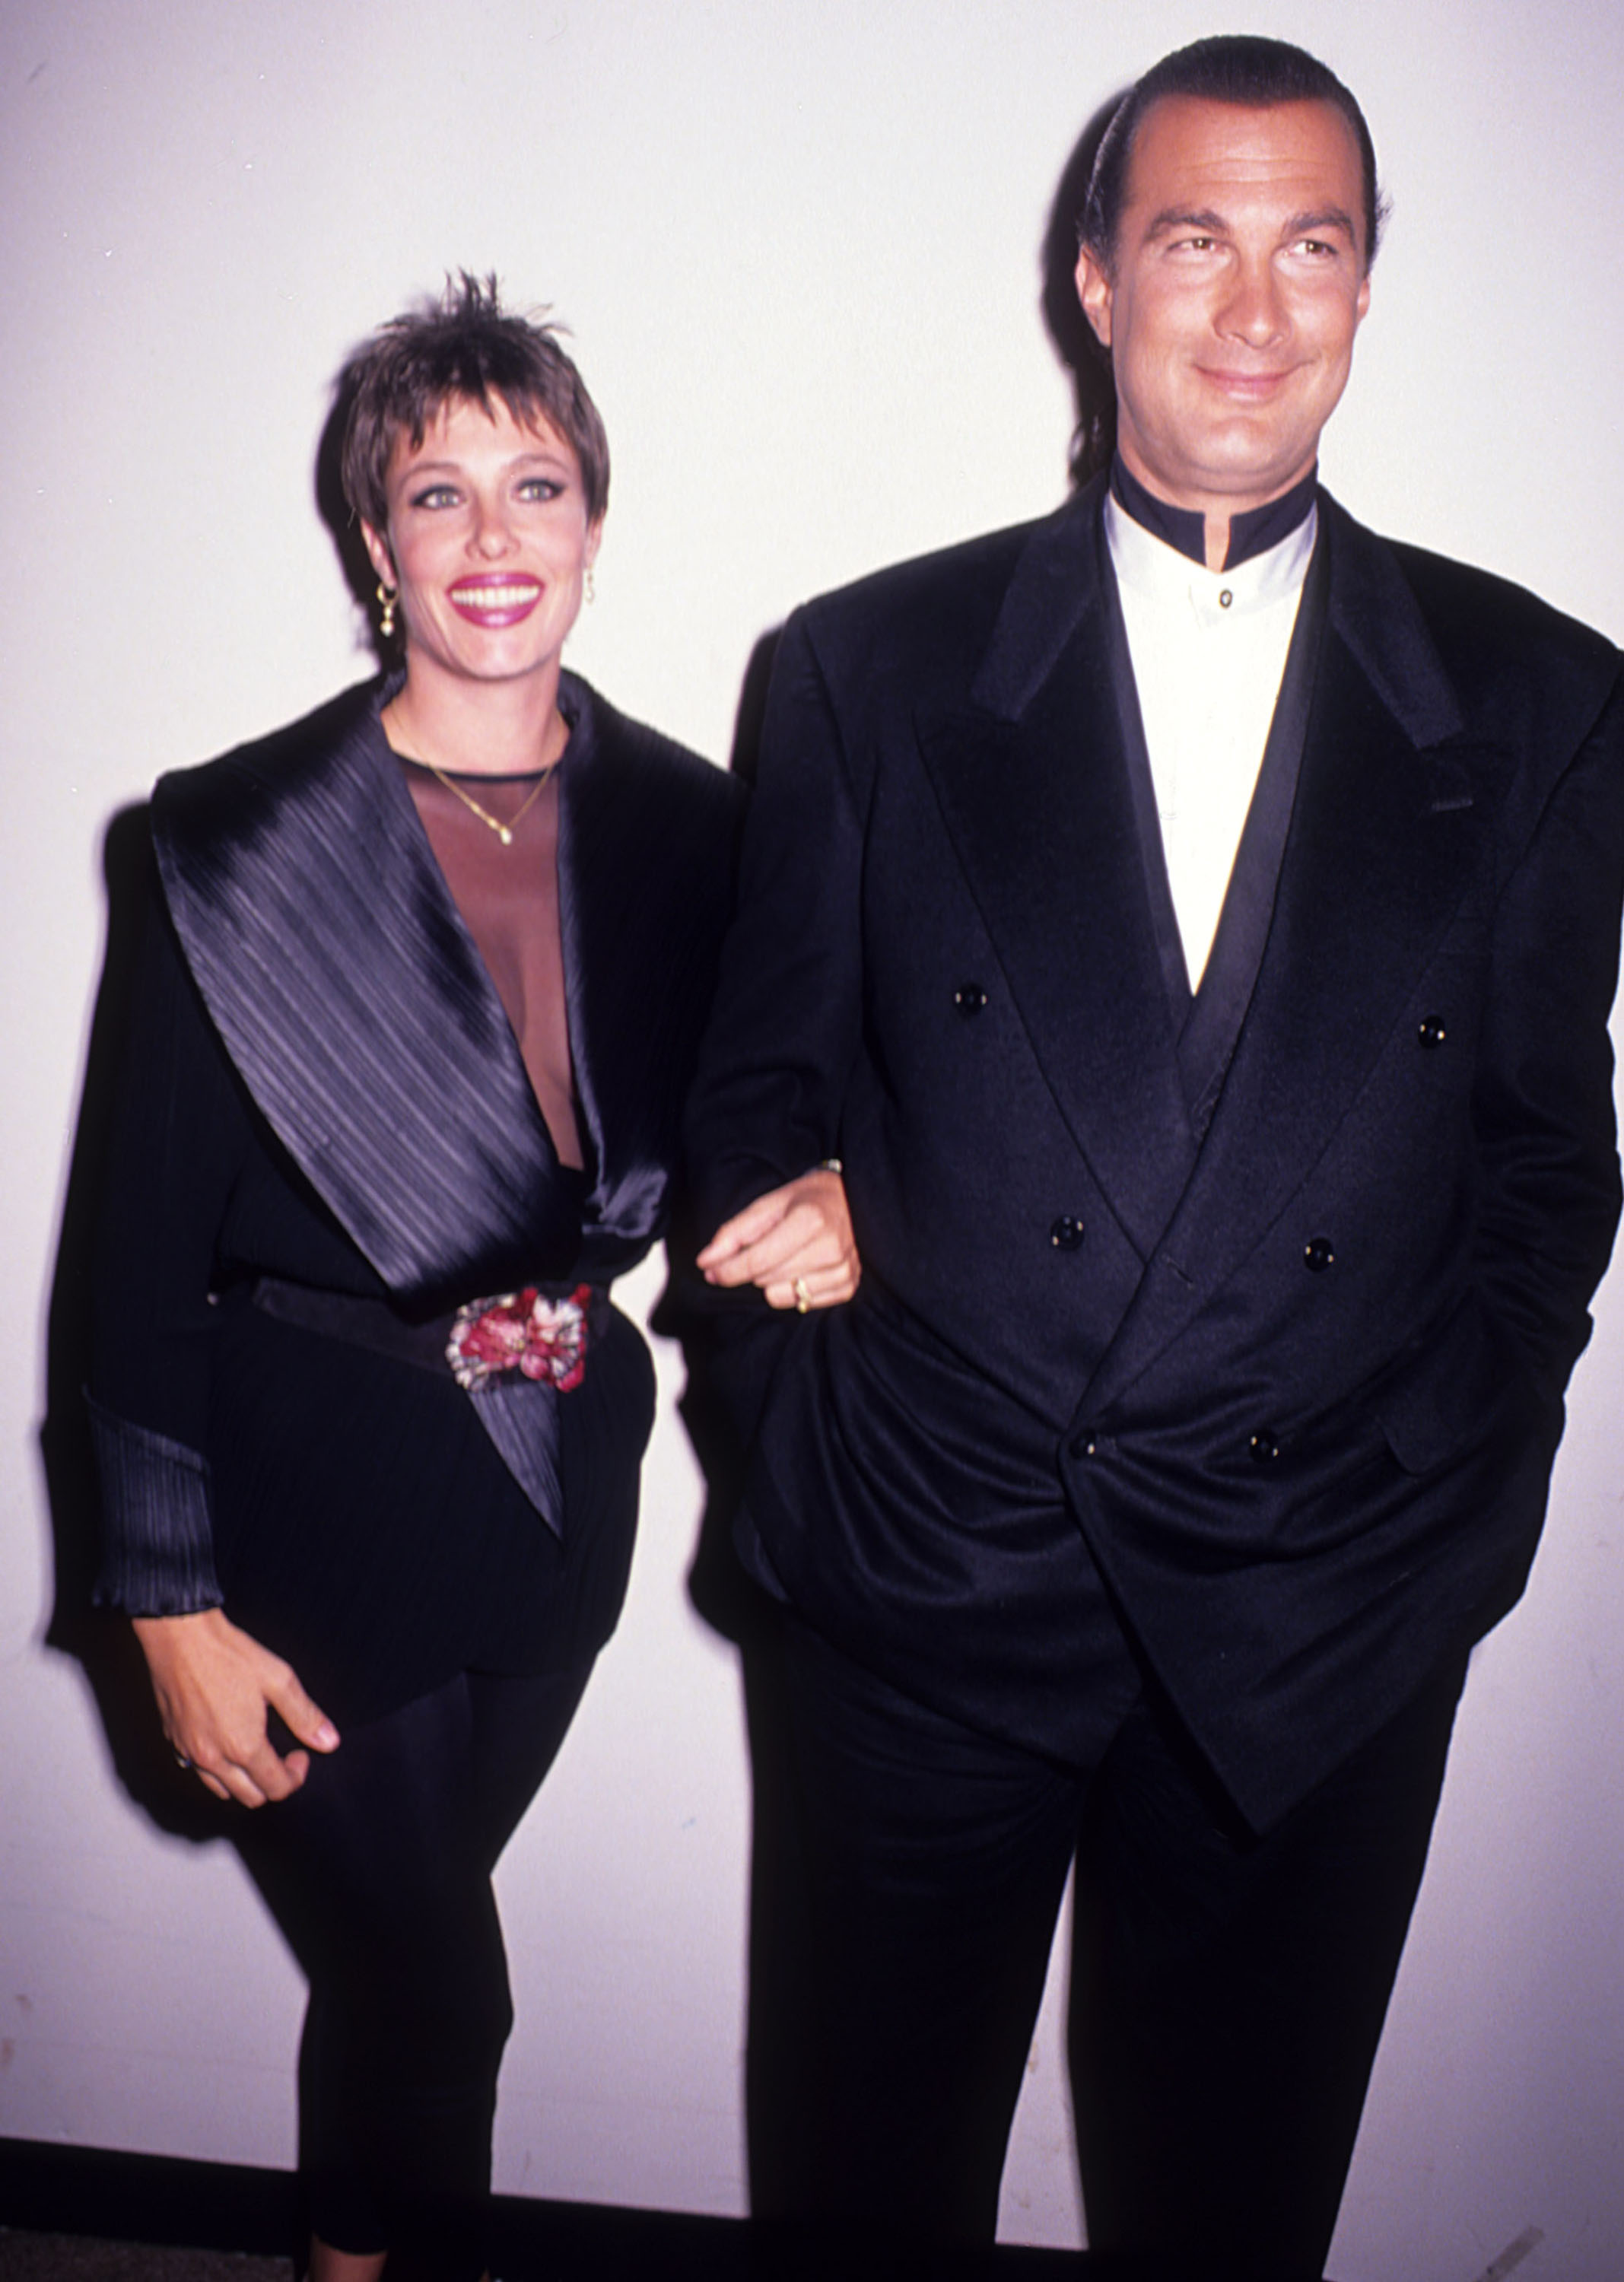 Kelly LeBrock and Steven Seagal at the film premiere of "Out for Justice," 1991 | Sources: Getty Images